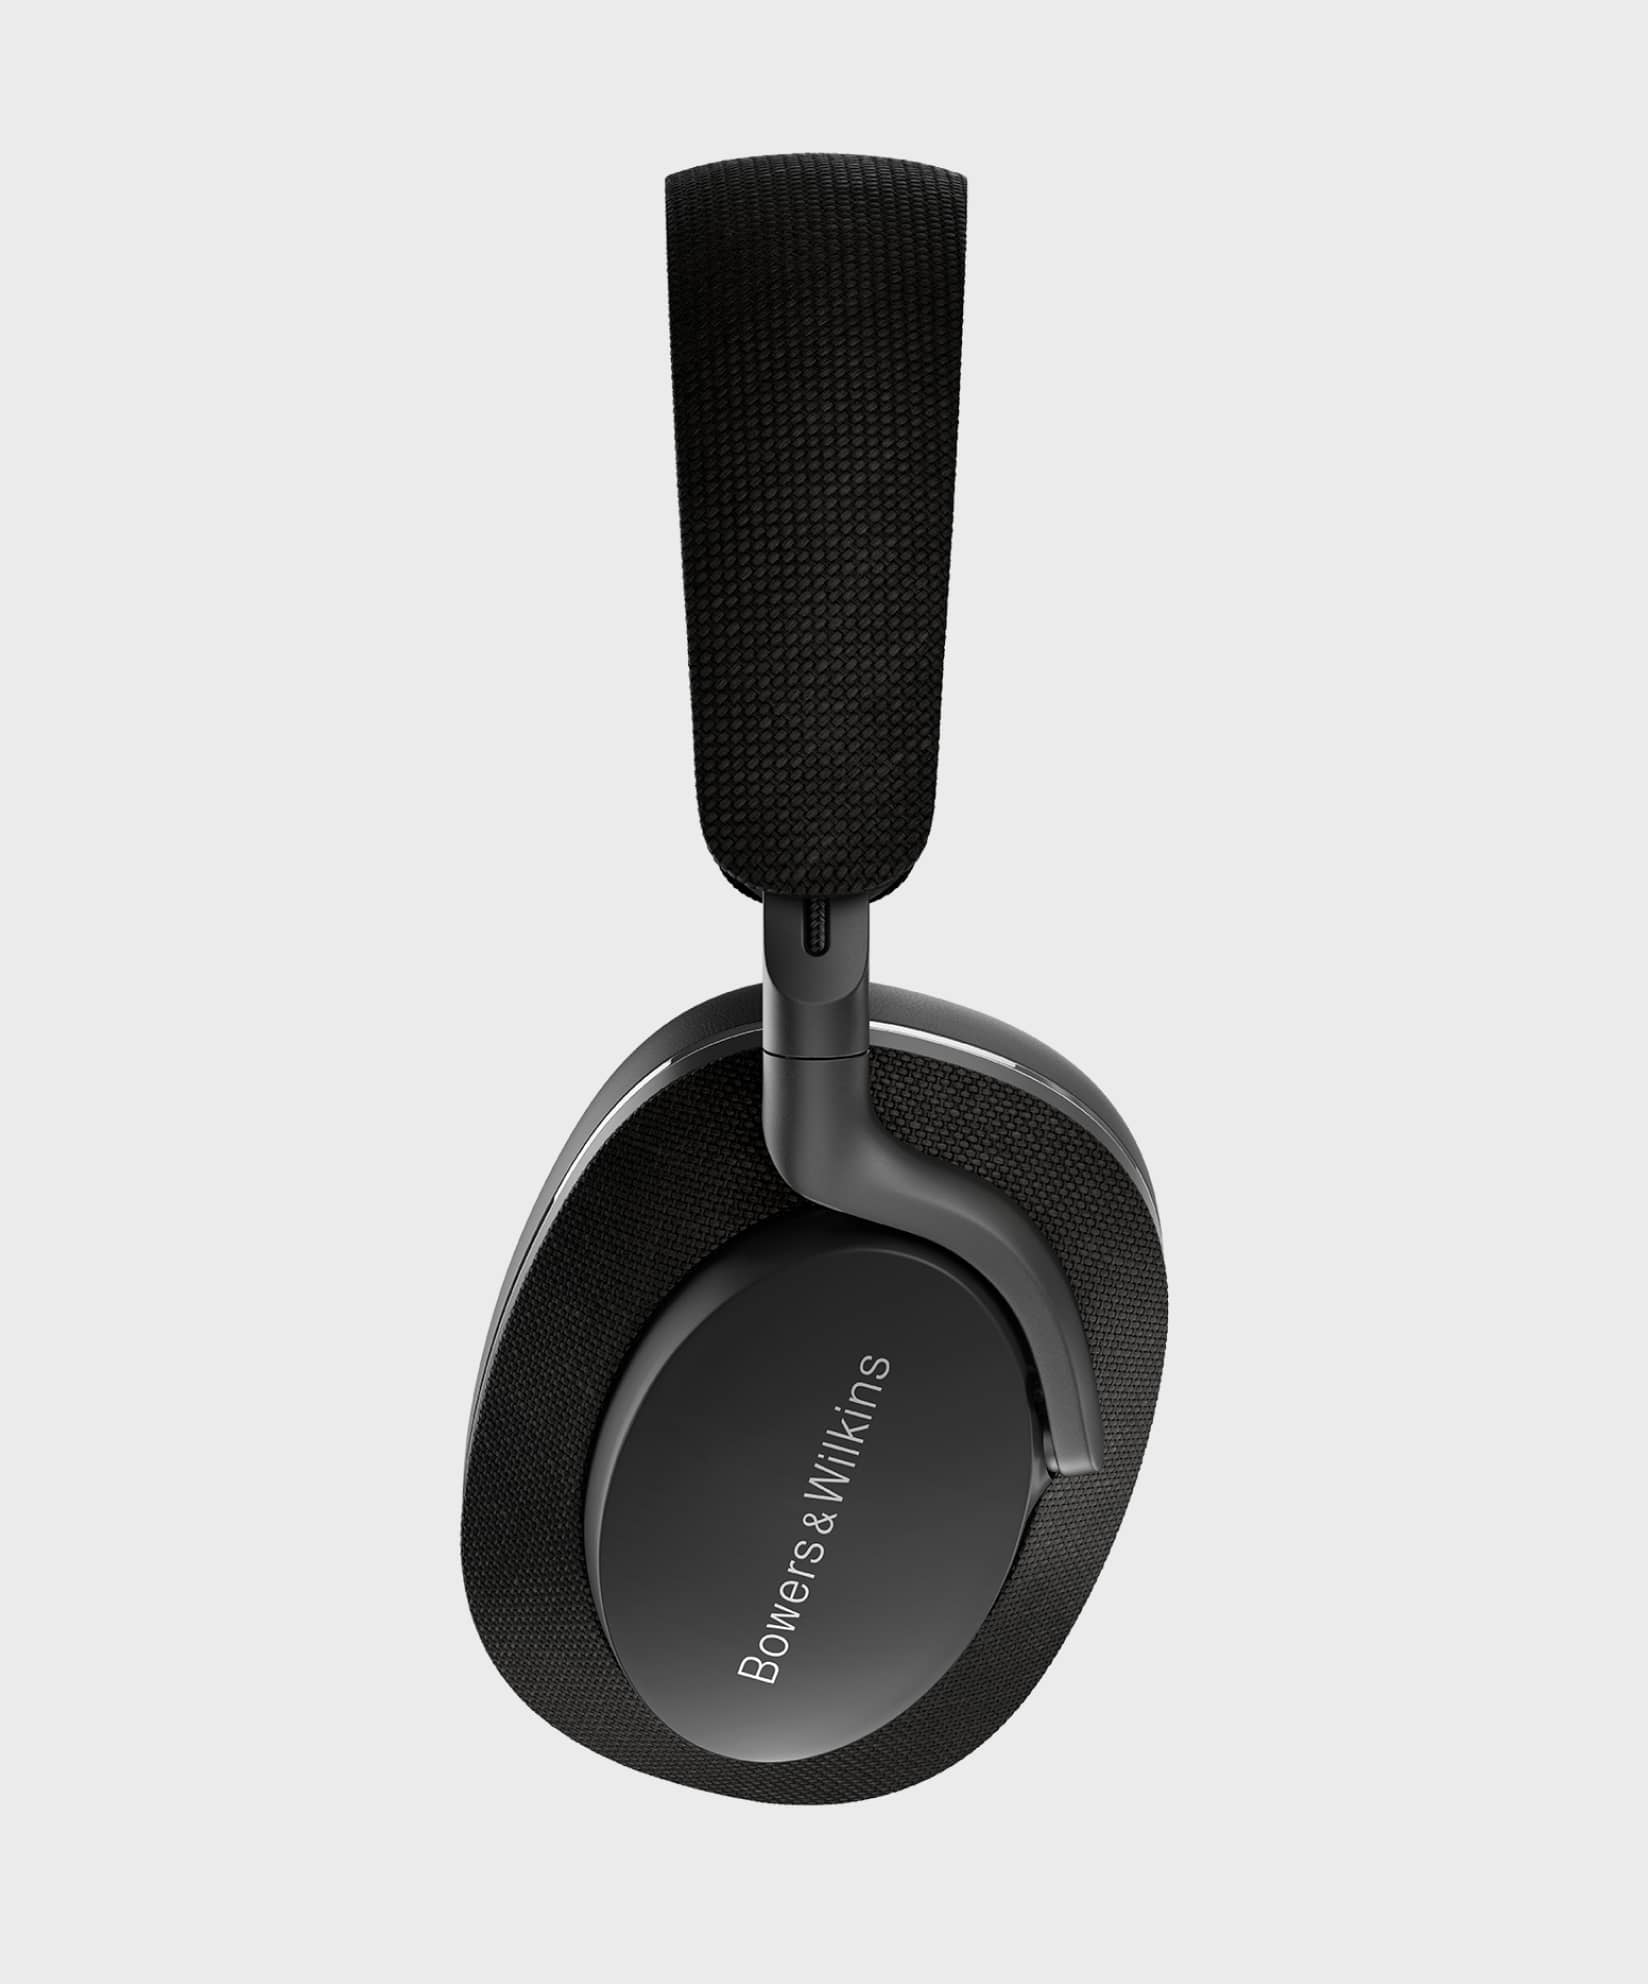 Px7 S2 Over-ear noise canceling headphones | Bowers & Wilkins